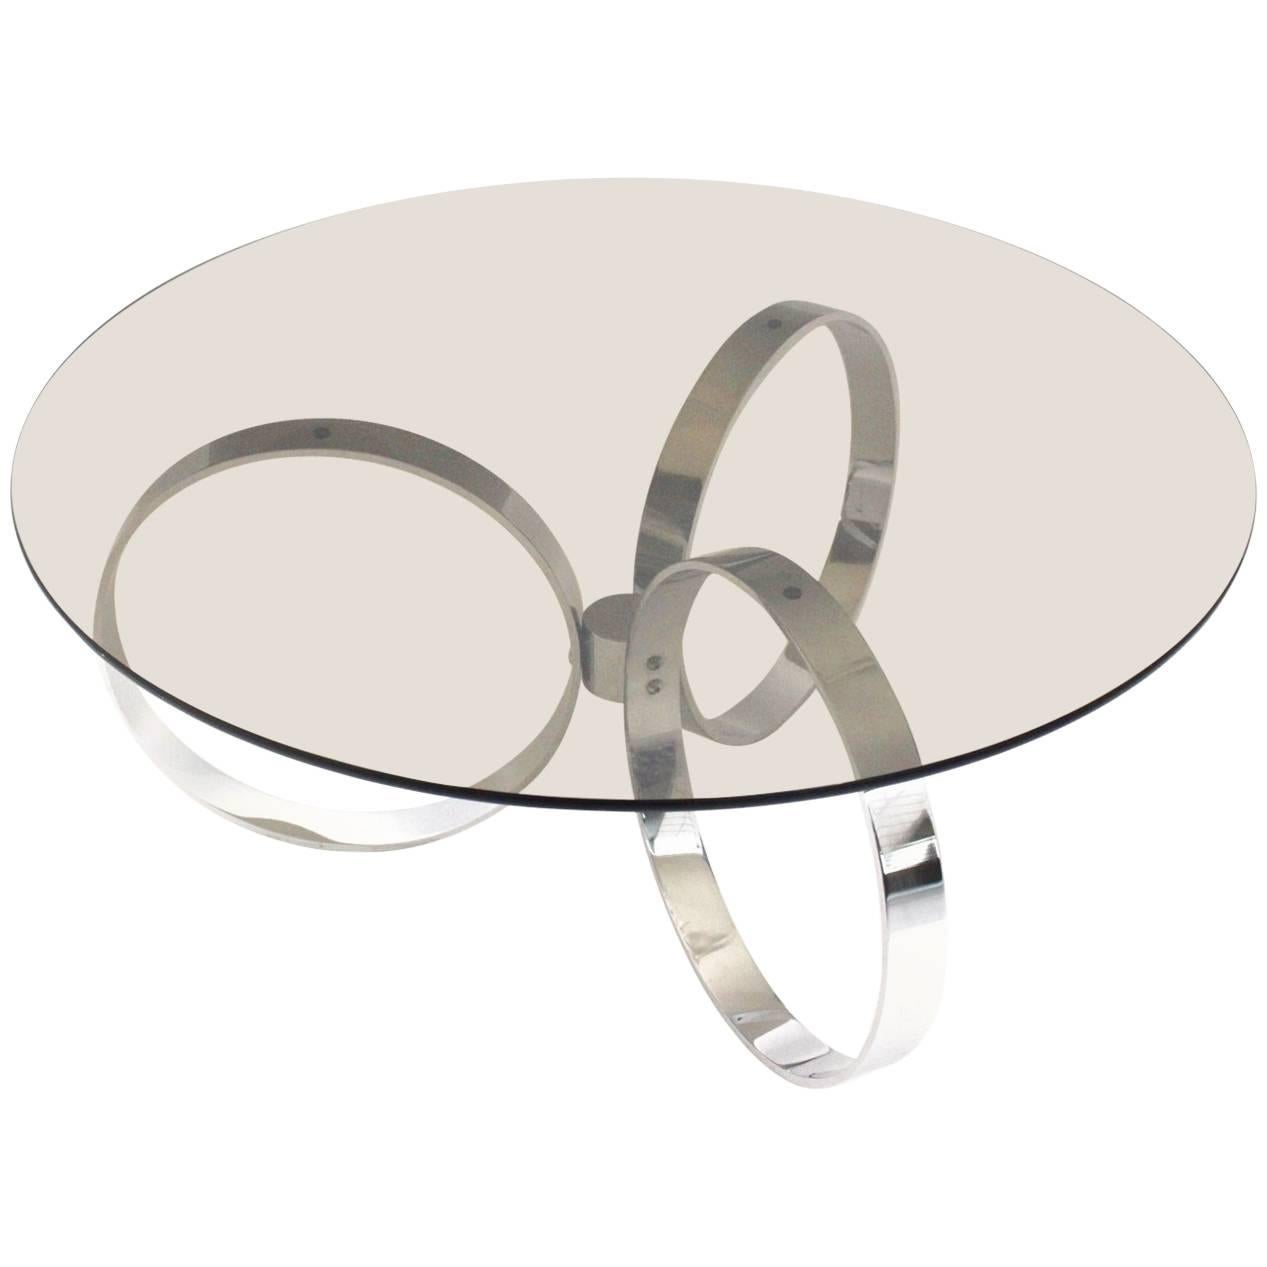 Modernist Chromed Vintage Coffee Table with Three Rings, 1970s